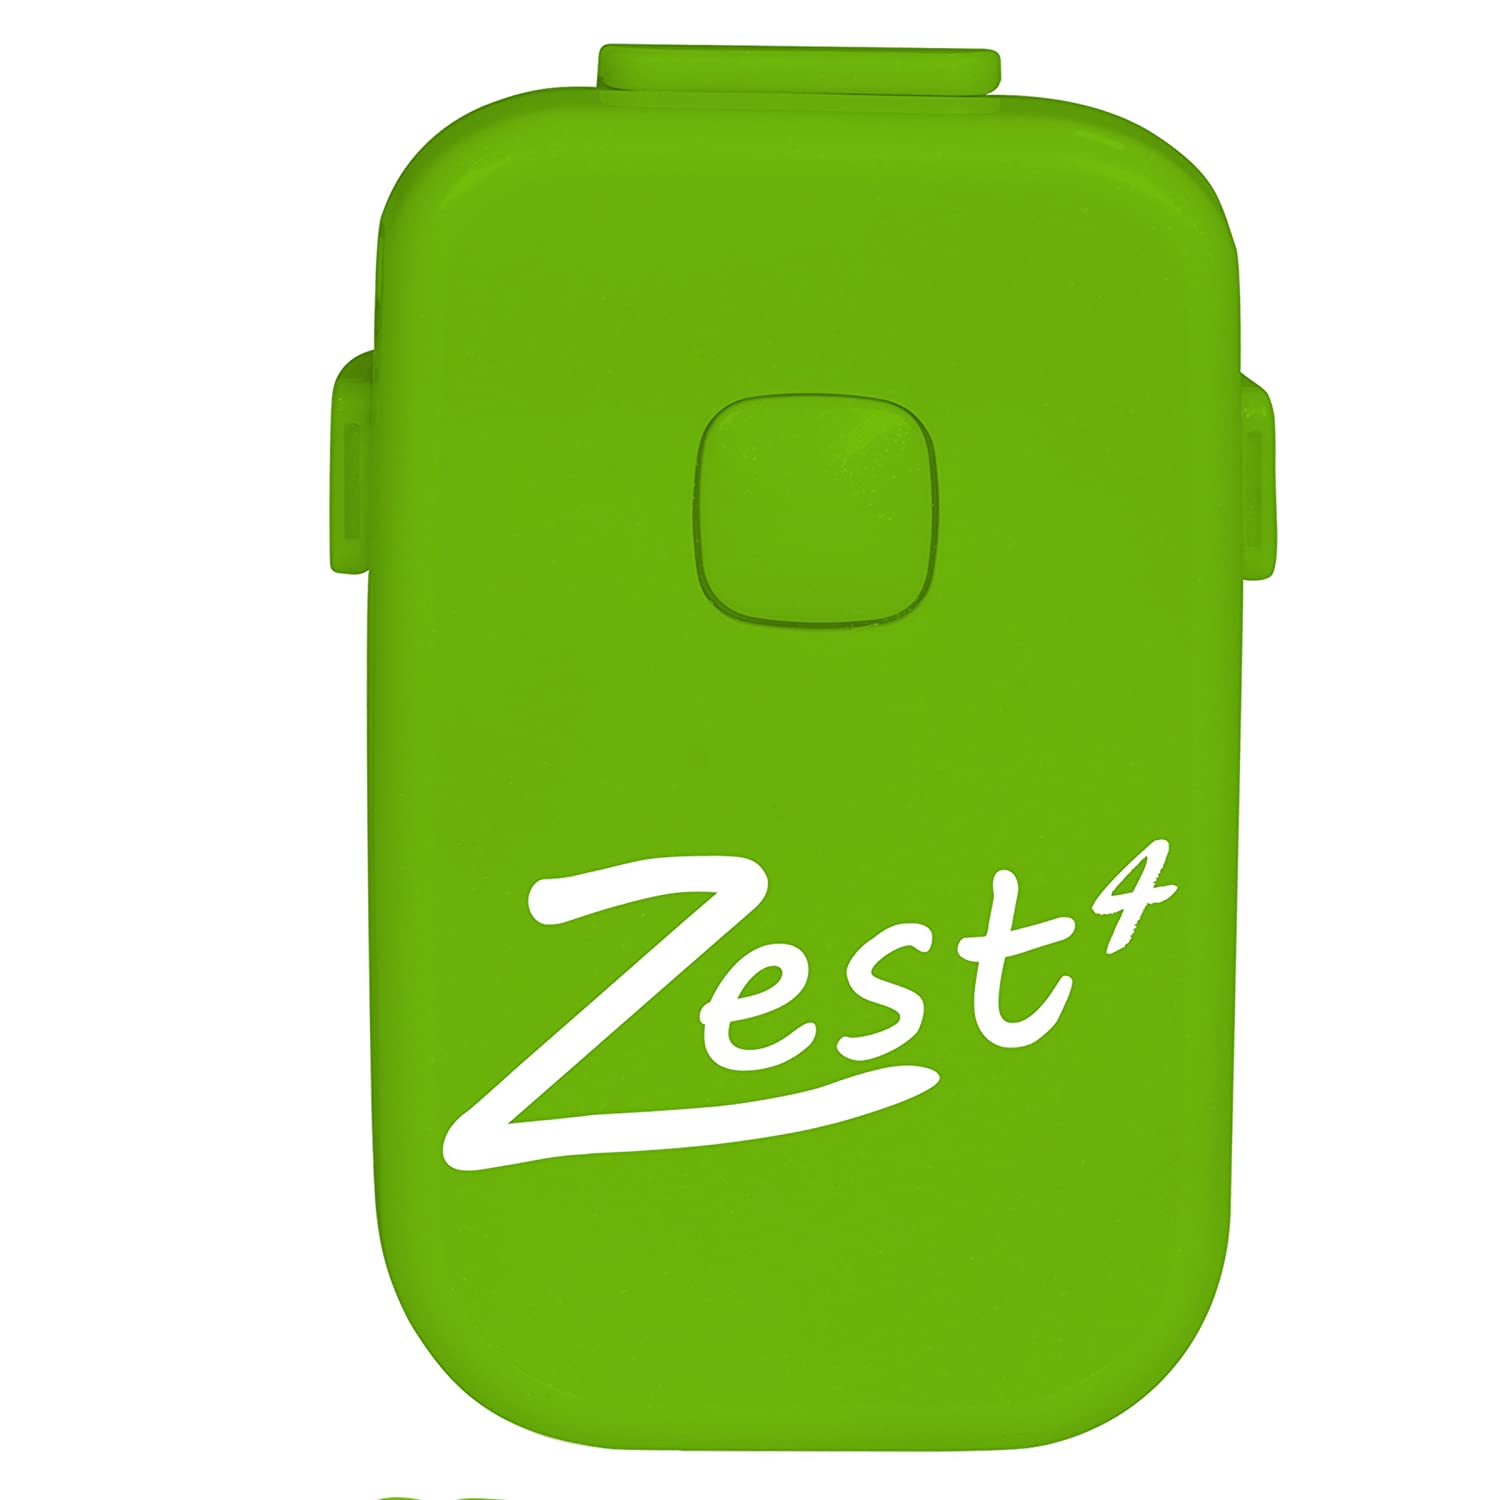 Zest 4 Bedwetting Alarm (Enuresis Alarm) with 8 Tones and Strong Vibration to Stop Bedwetting in Boys, Girls and Deep Sleepers